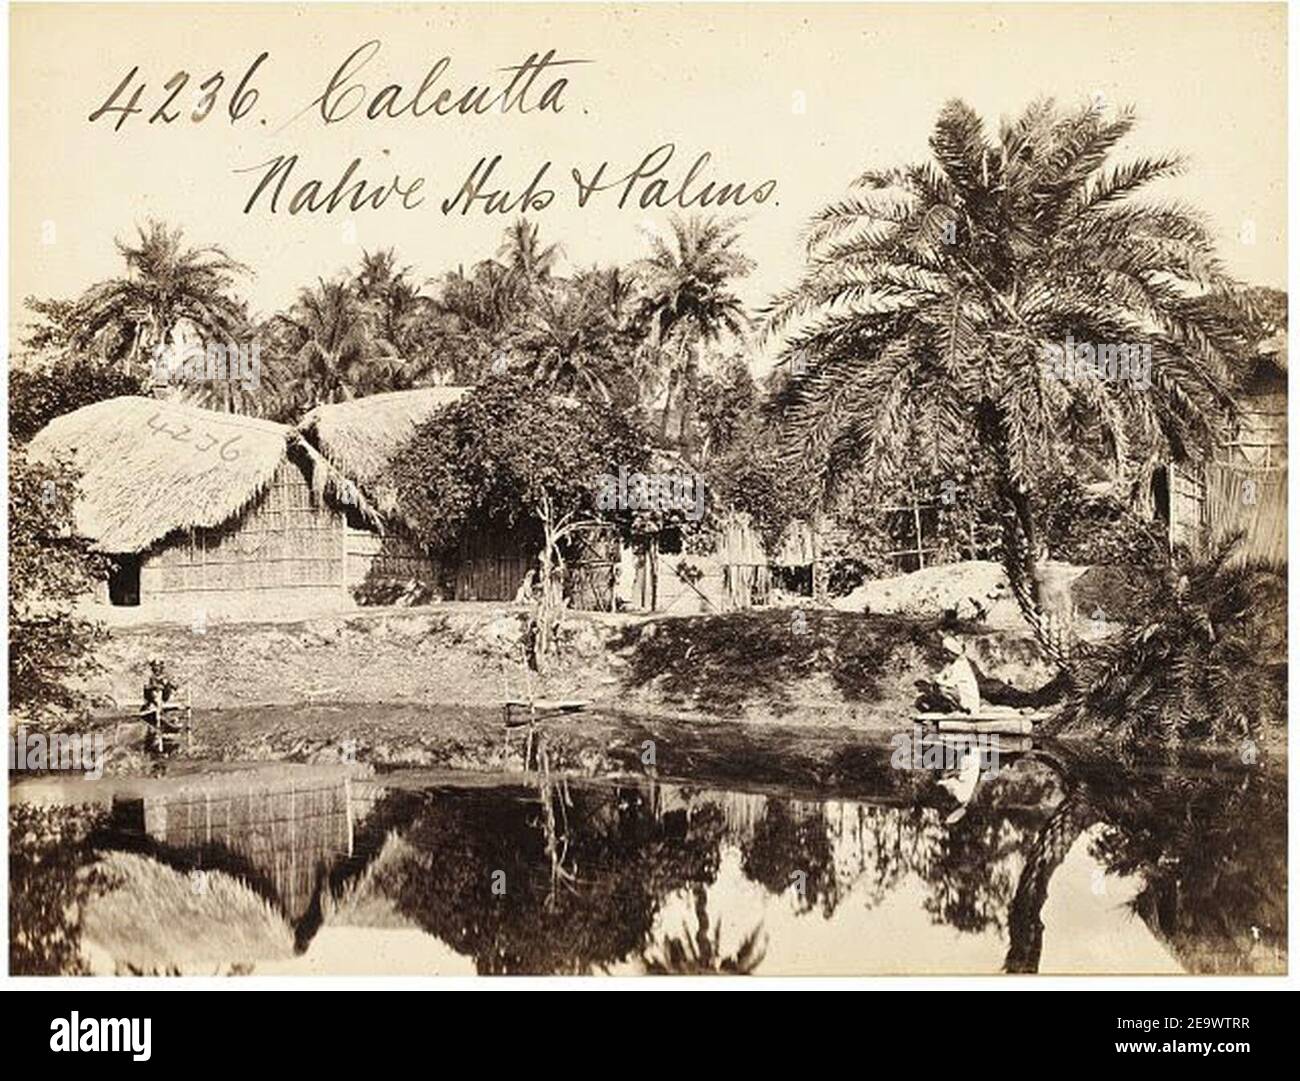 Native huts and palms in Calcutta by Francis Frith. Stock Photo